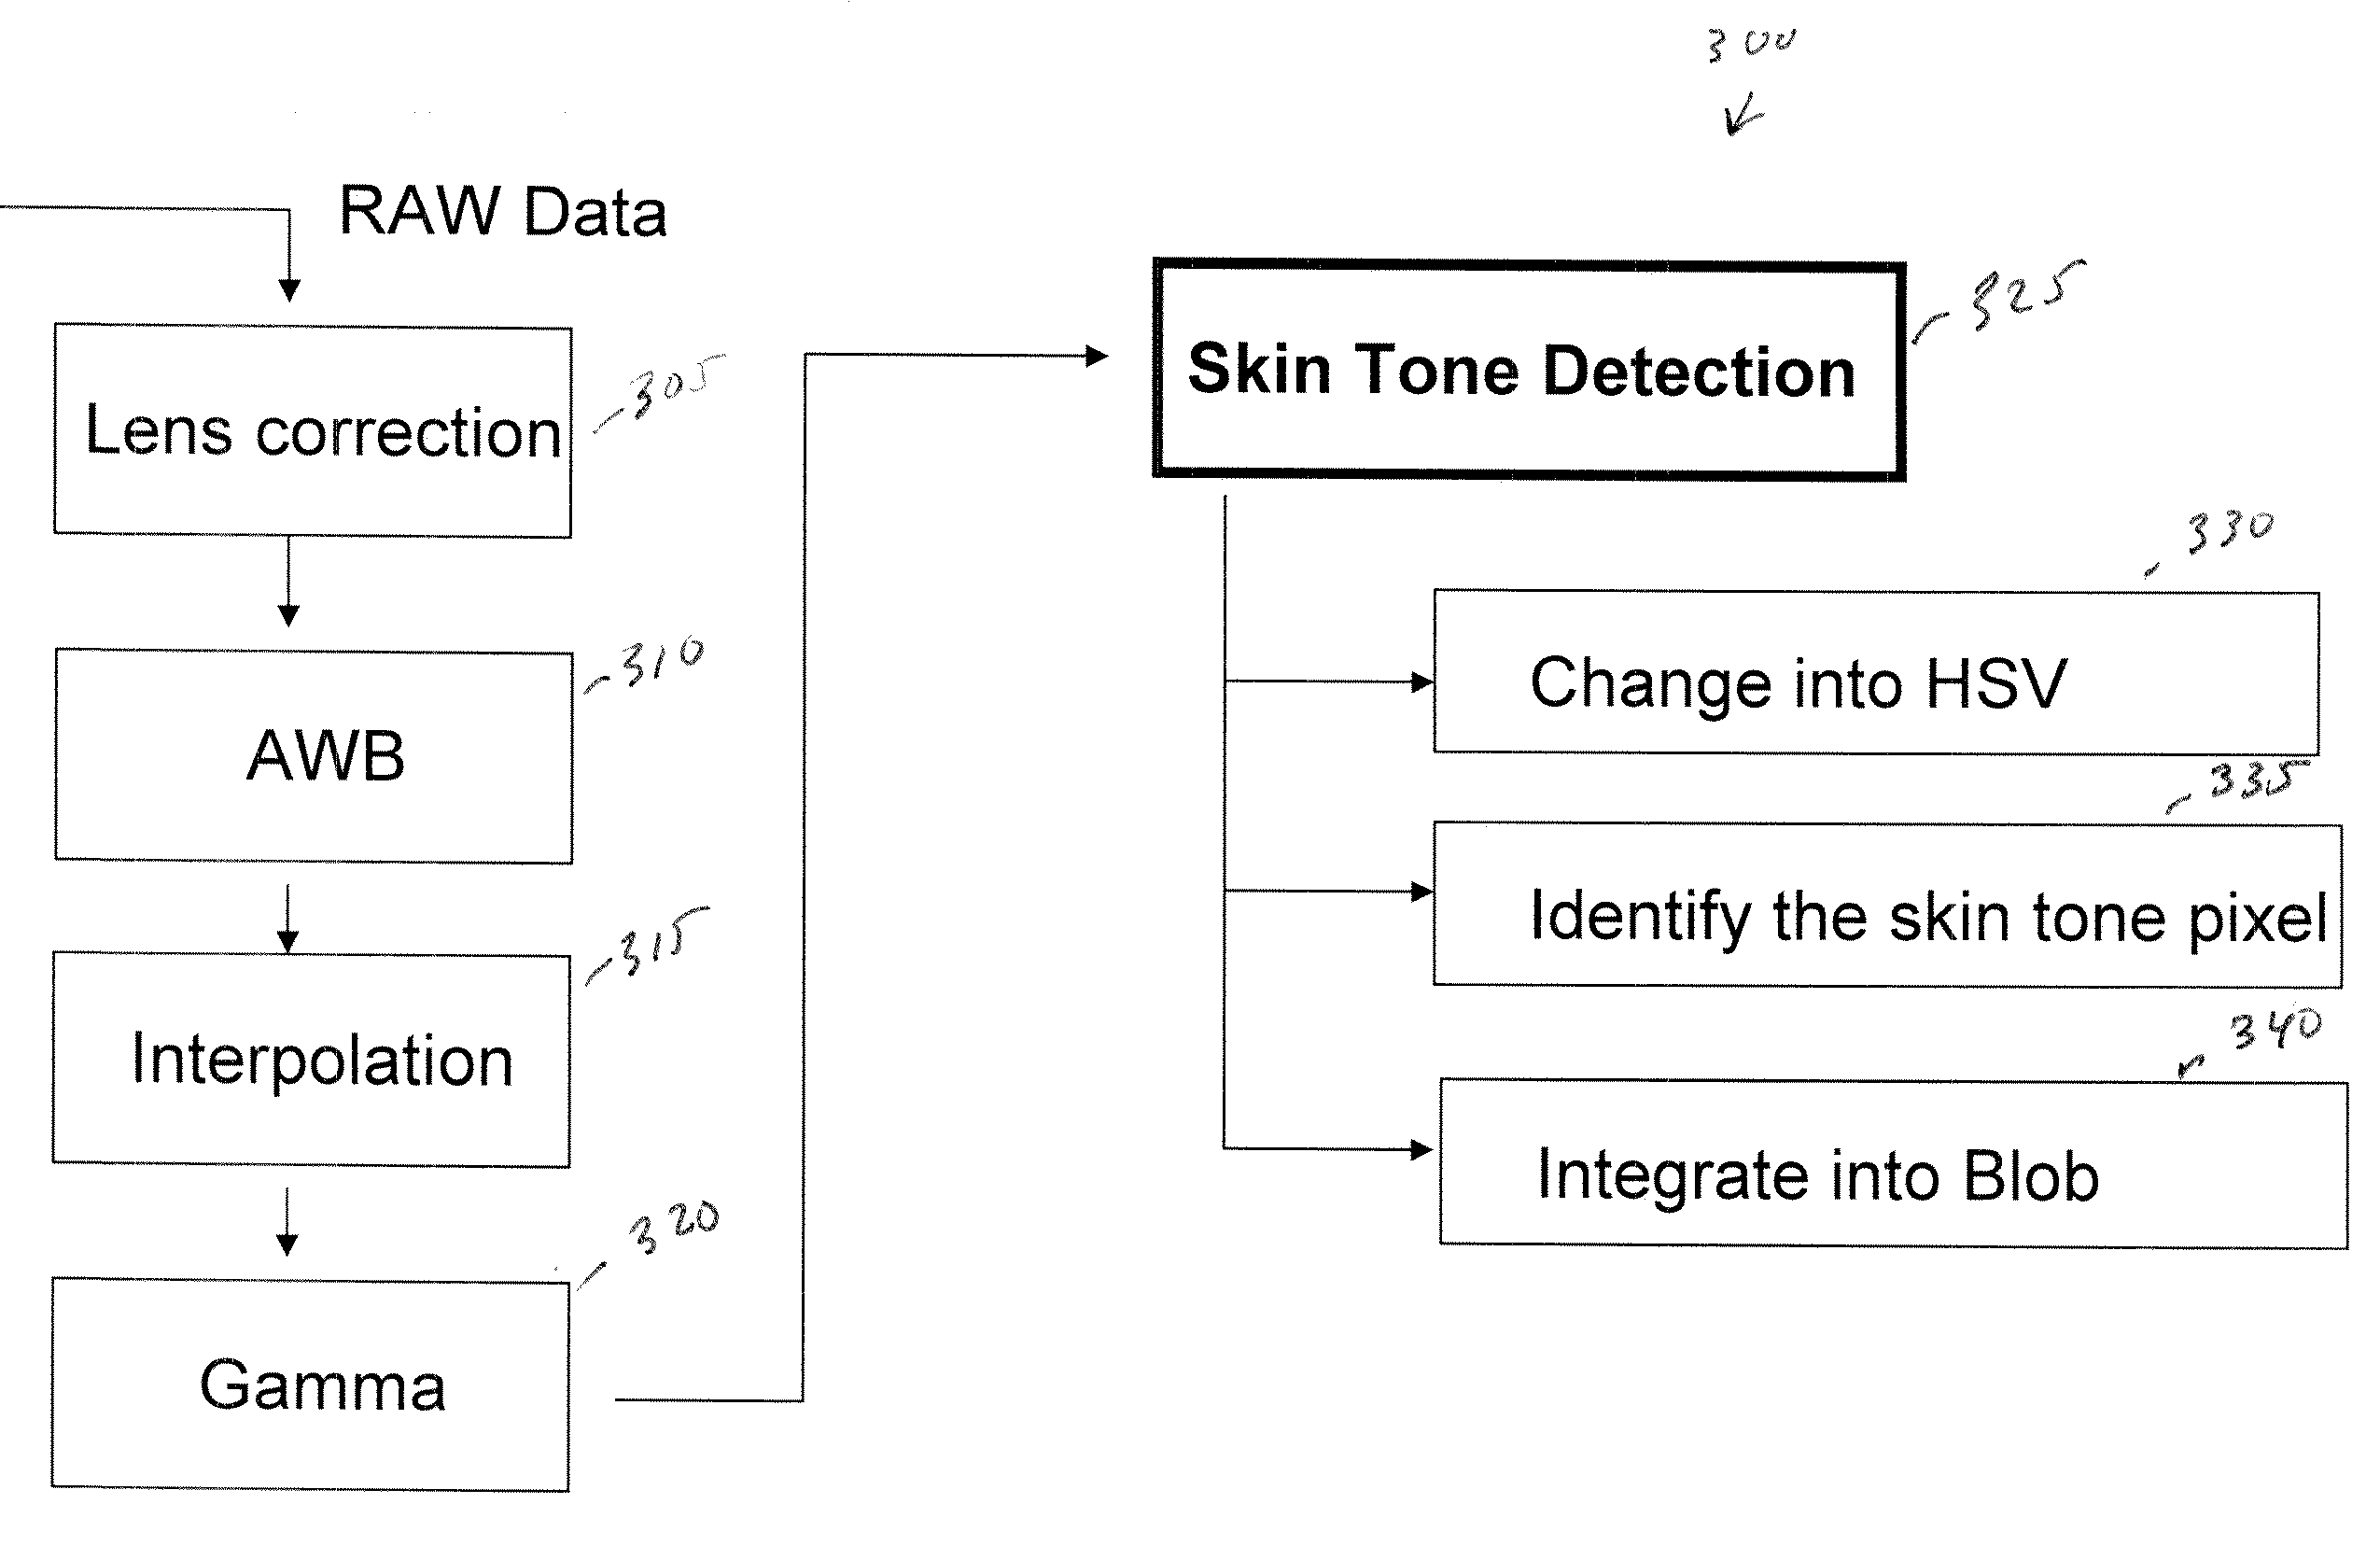 Apparatus, system, and method for skin tone detection in a CMOS image sensor